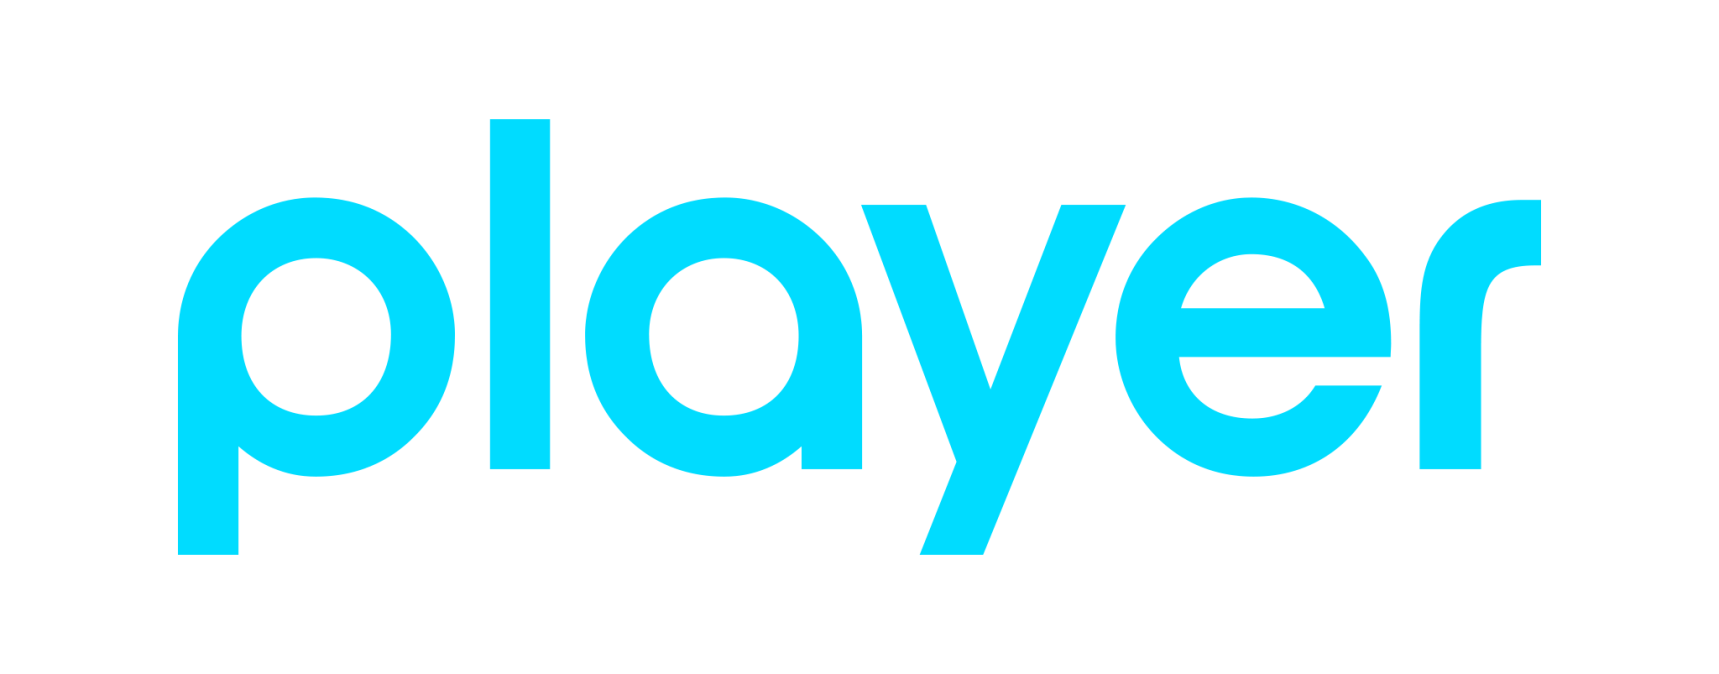 player-nowy-logotyp.png